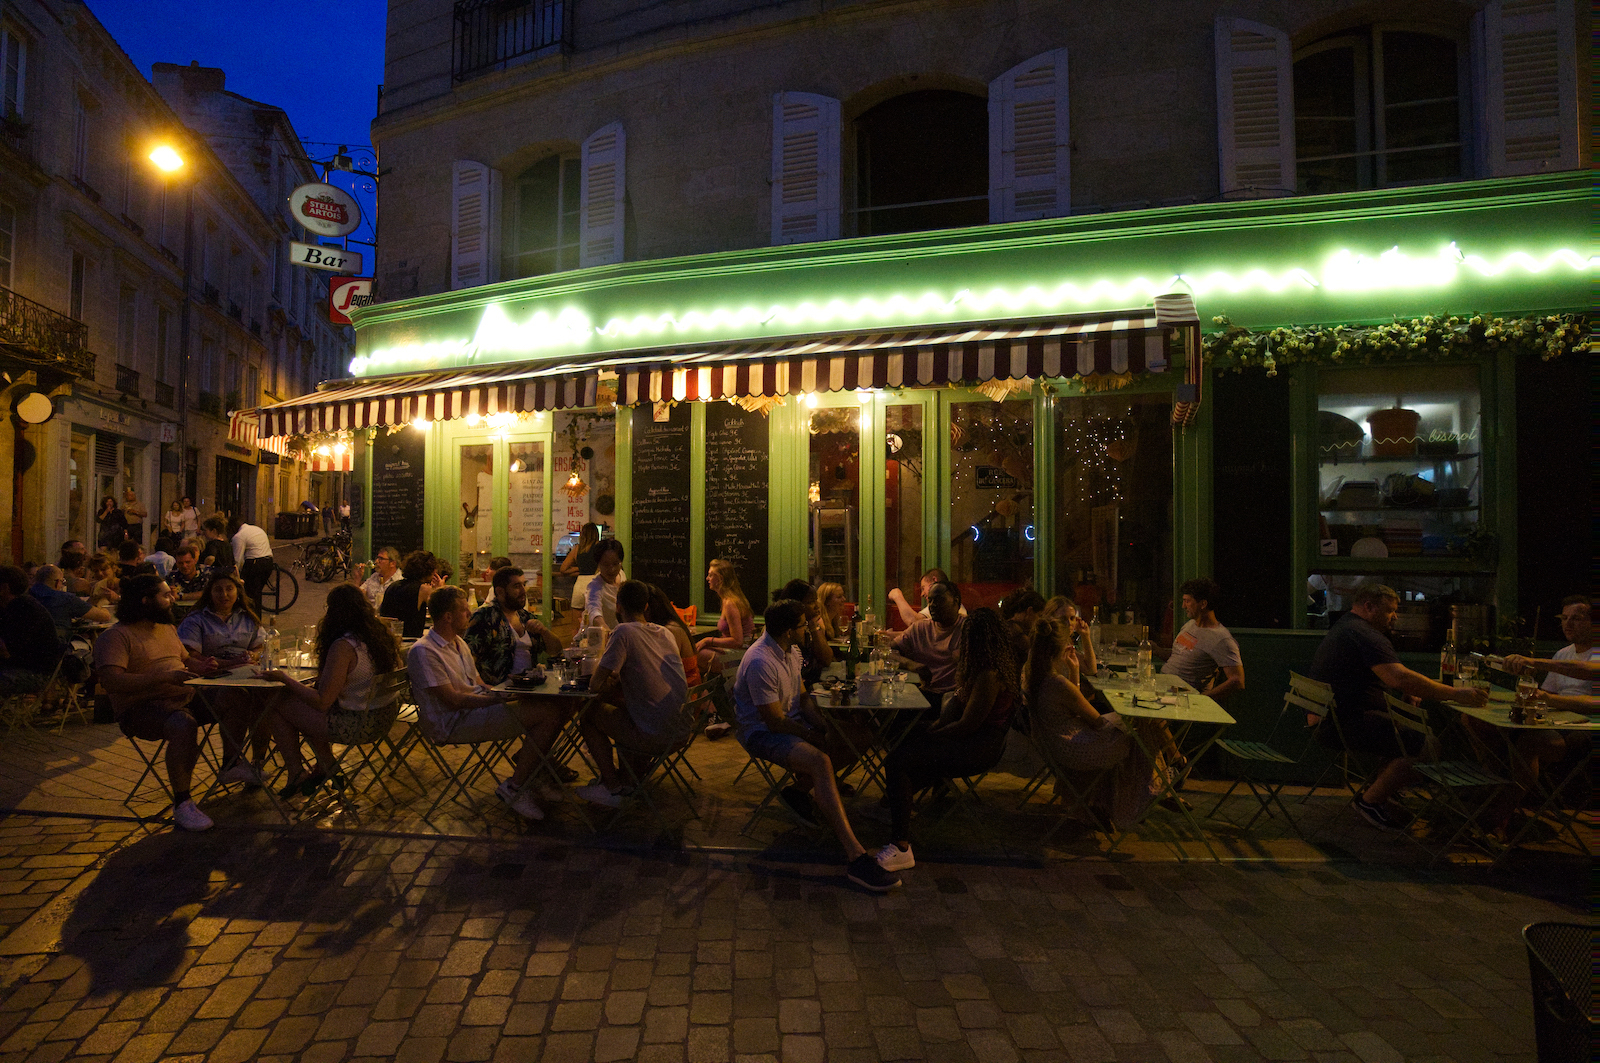 Sample image shot using the Sony Alpha A6700 of a bar in Bordeaux